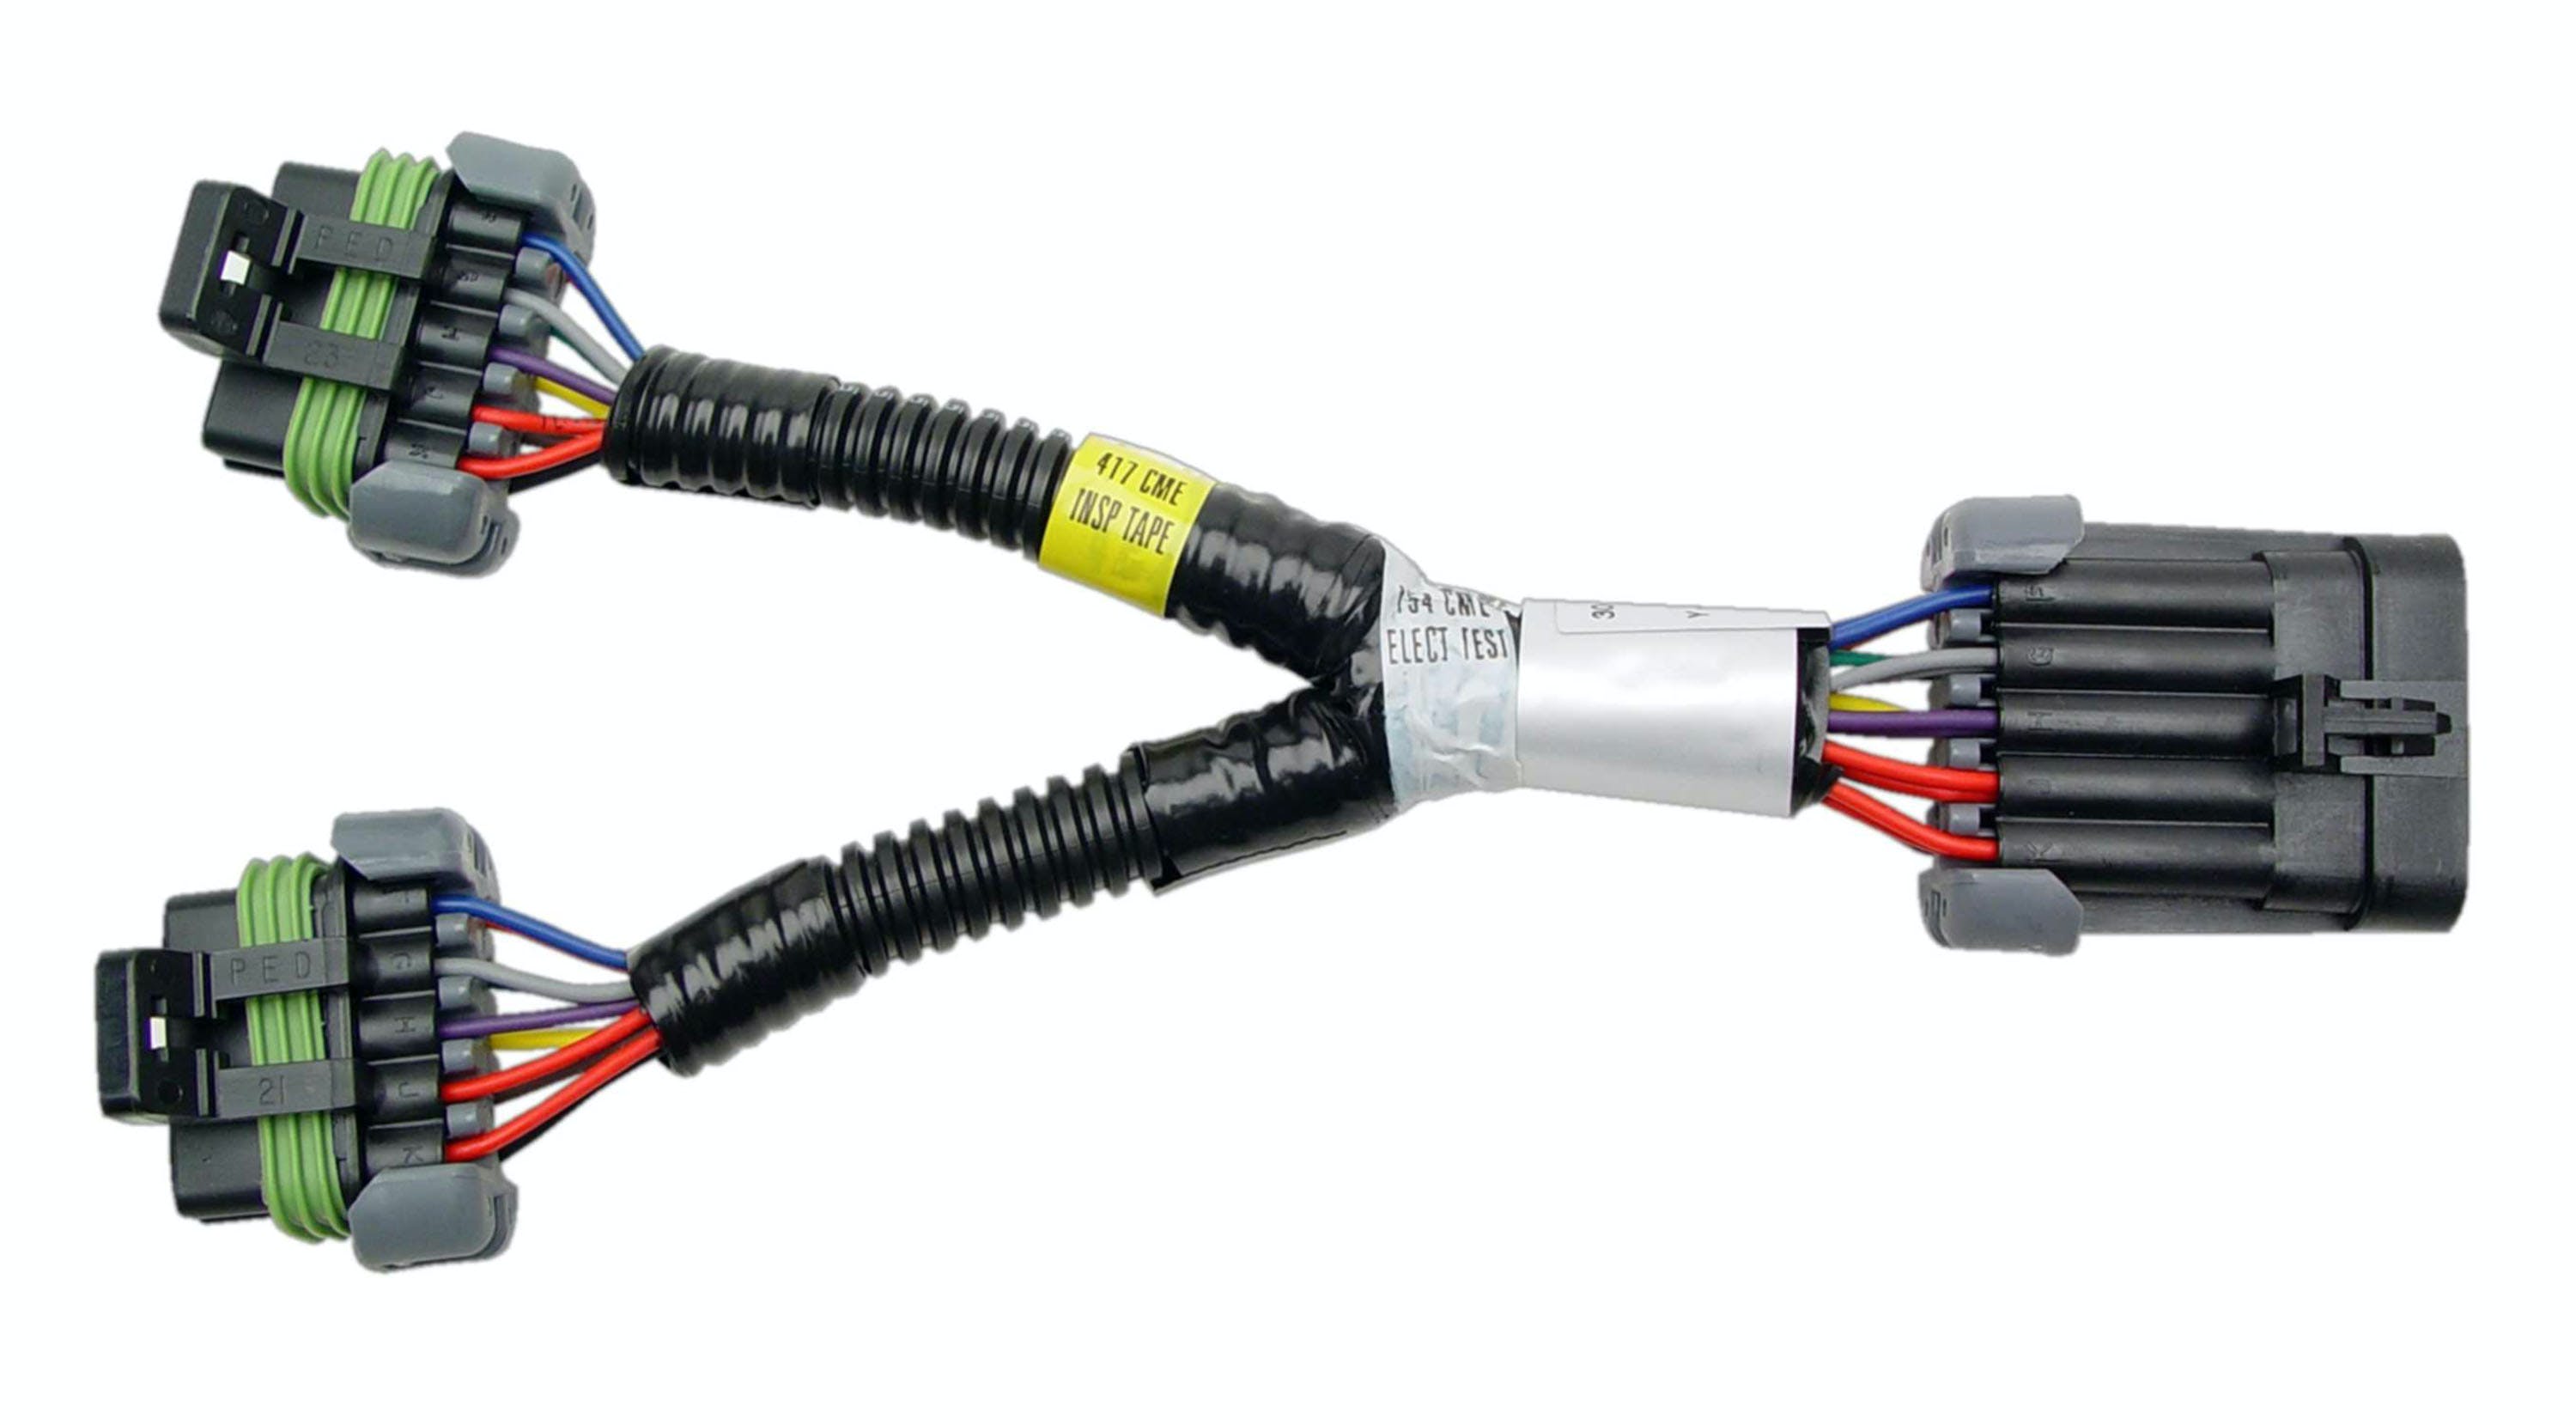 FAST - Fuel Air Spark Technology 301205 XFI Fuel Injector Y Adapter Harness for Multiple Injectors